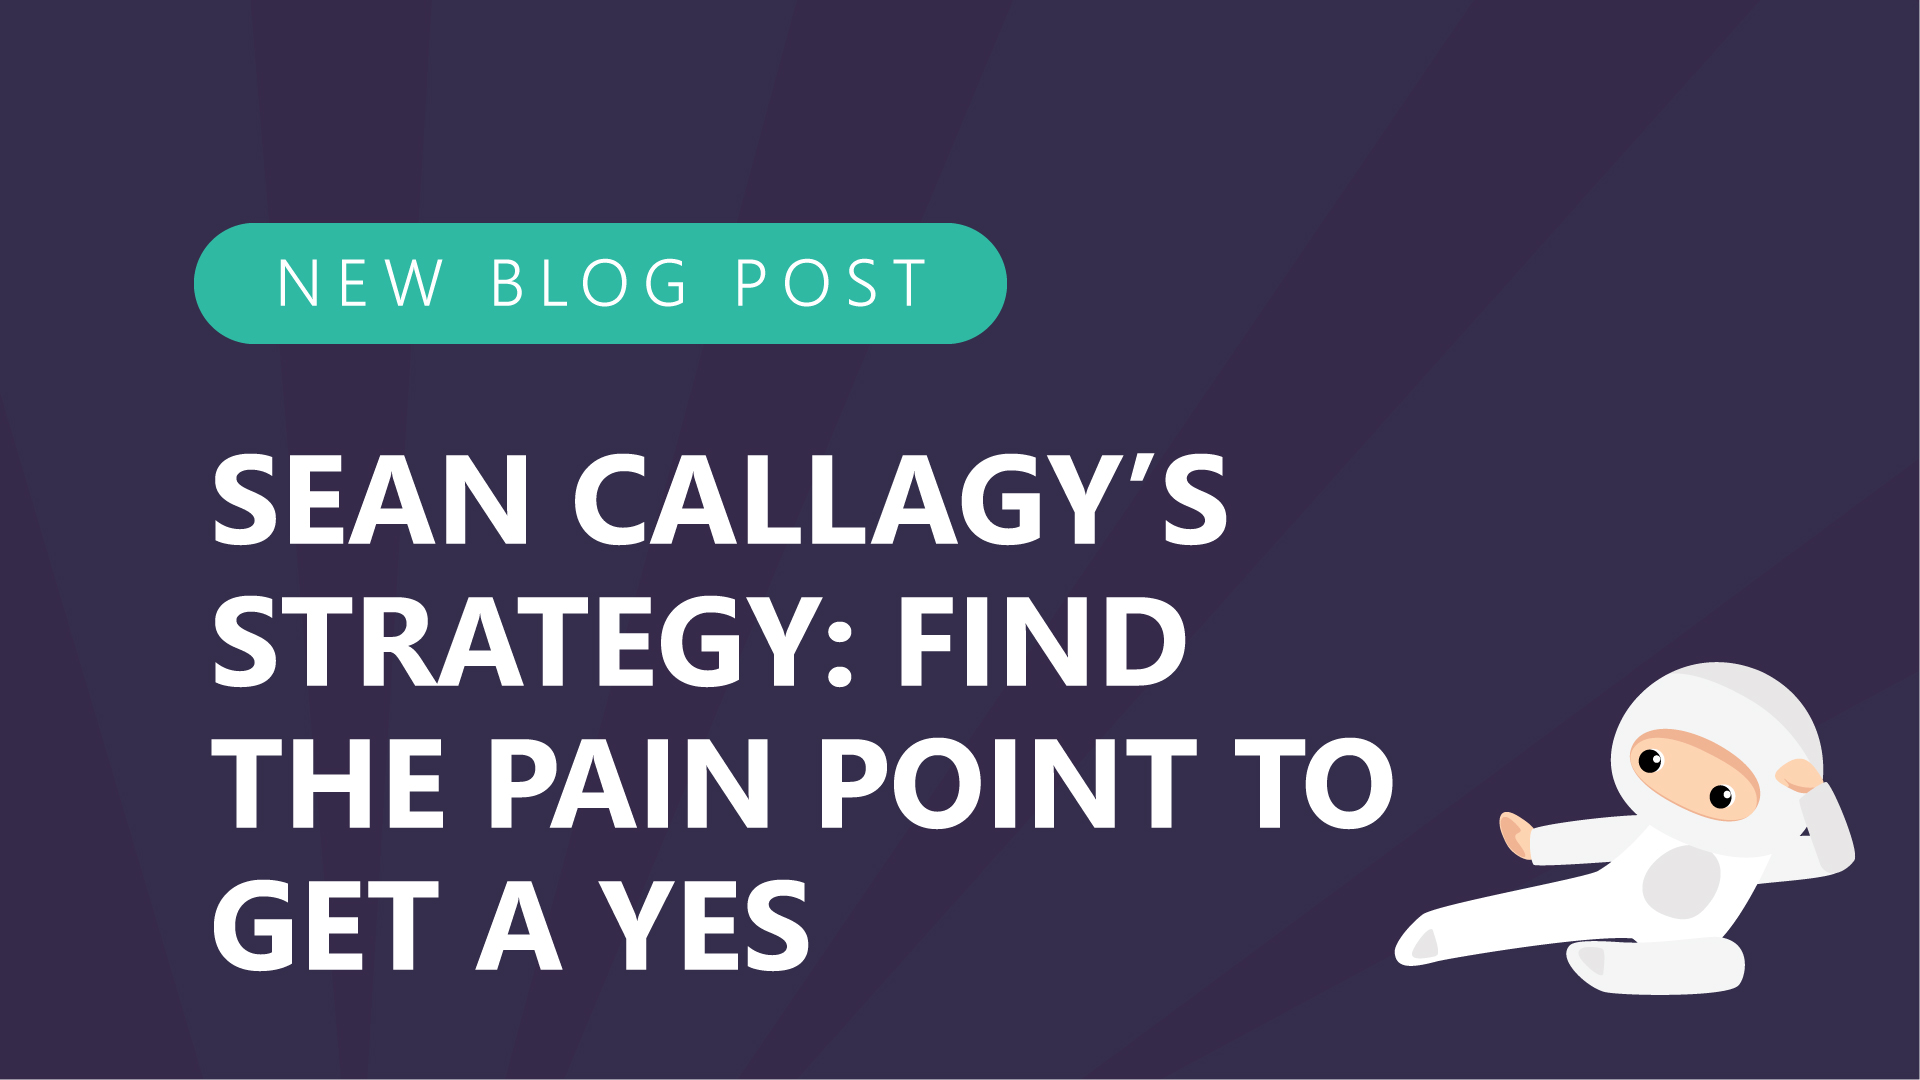 49-Sean-Callagys-Strategy-Find-the-Pain-Point-to-Get-a-Yes.jpg